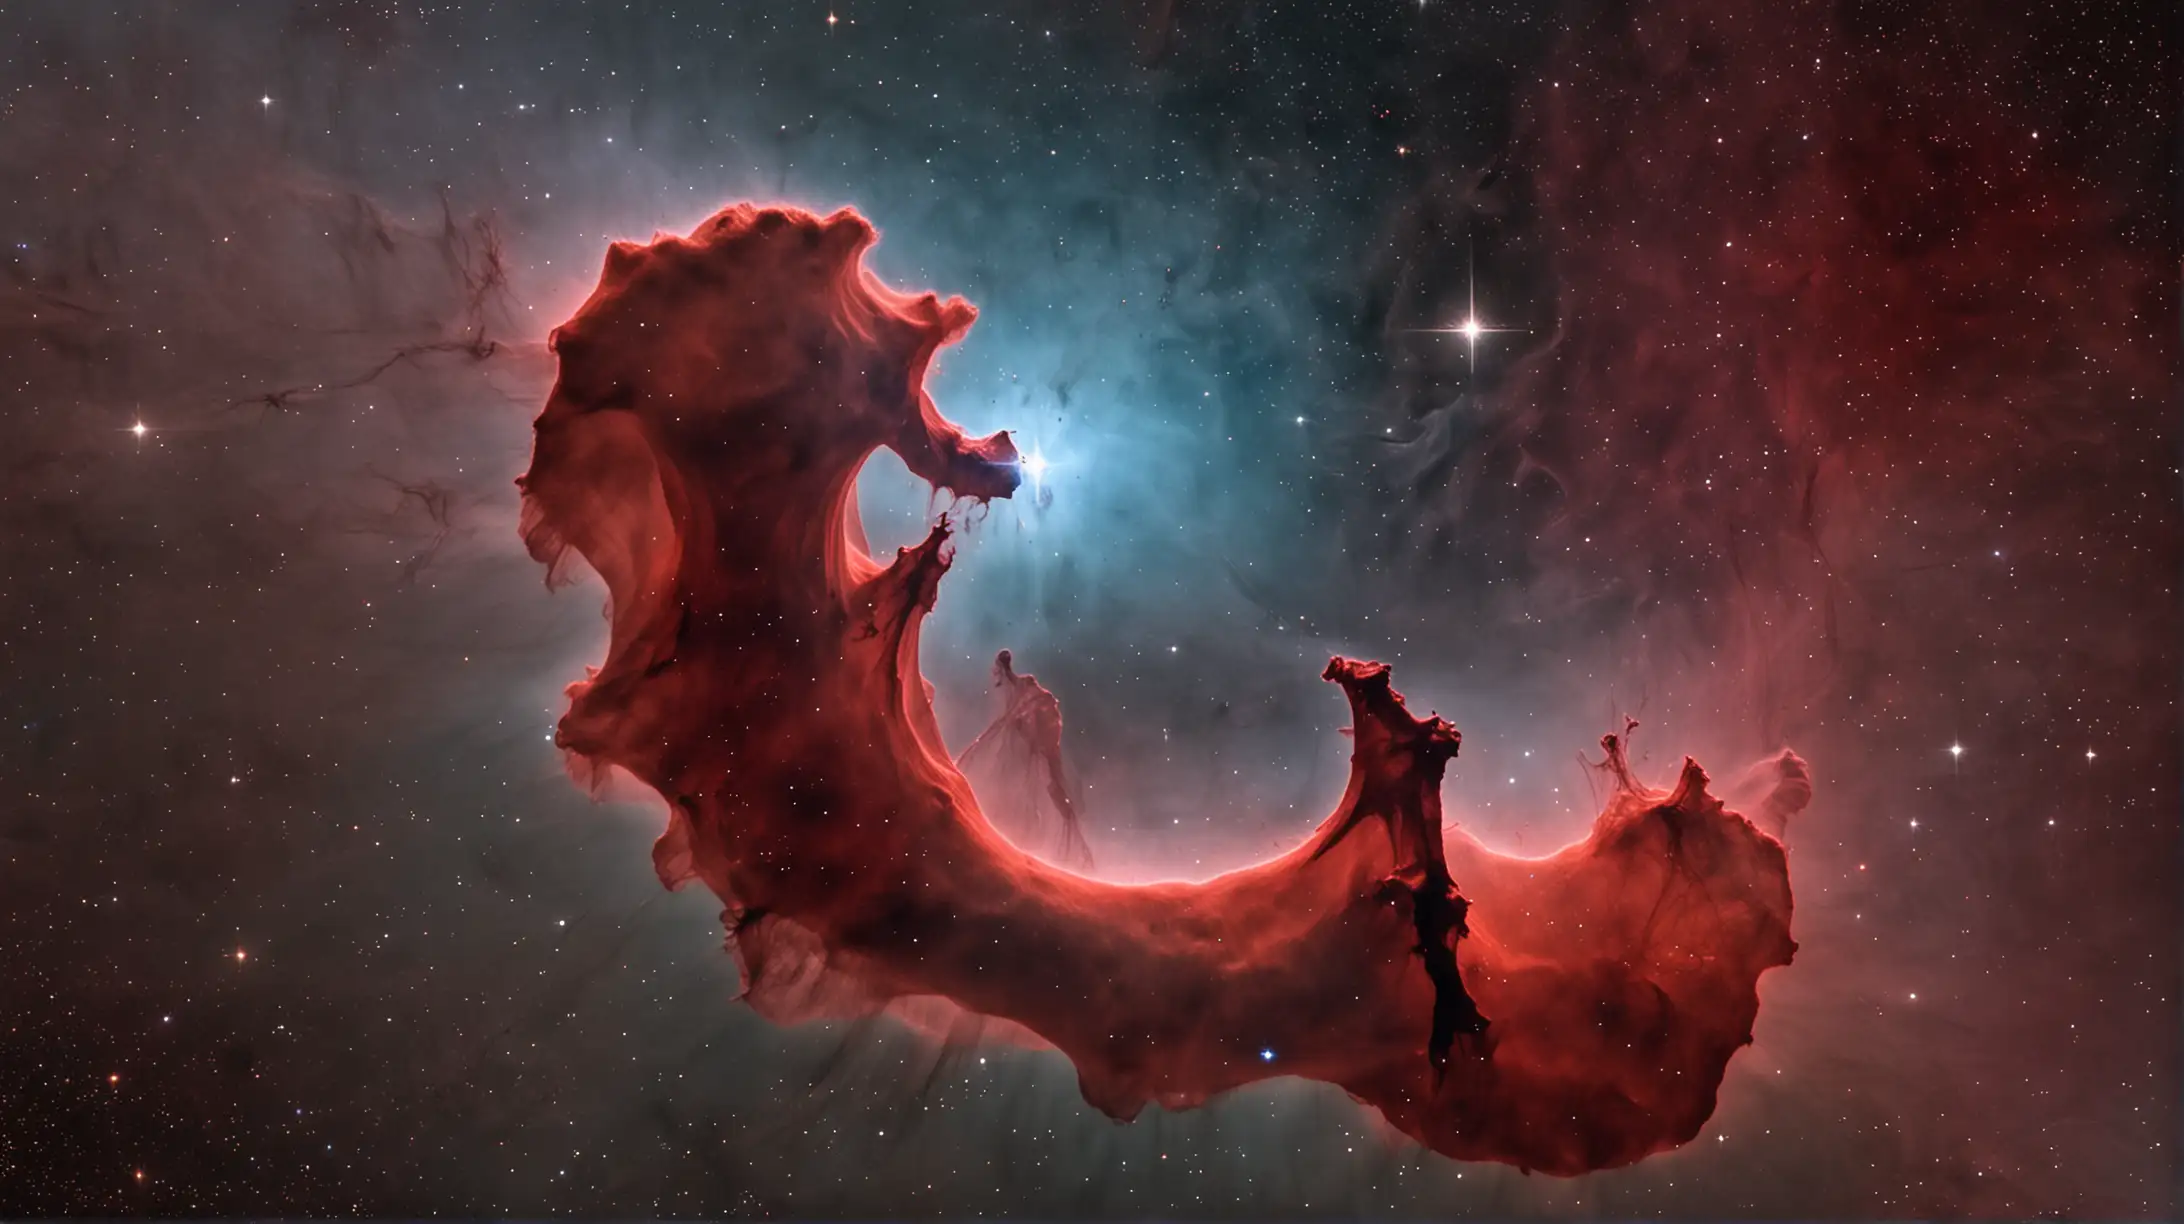 Nebula in Deep Space with Illuminated Gas Clouds